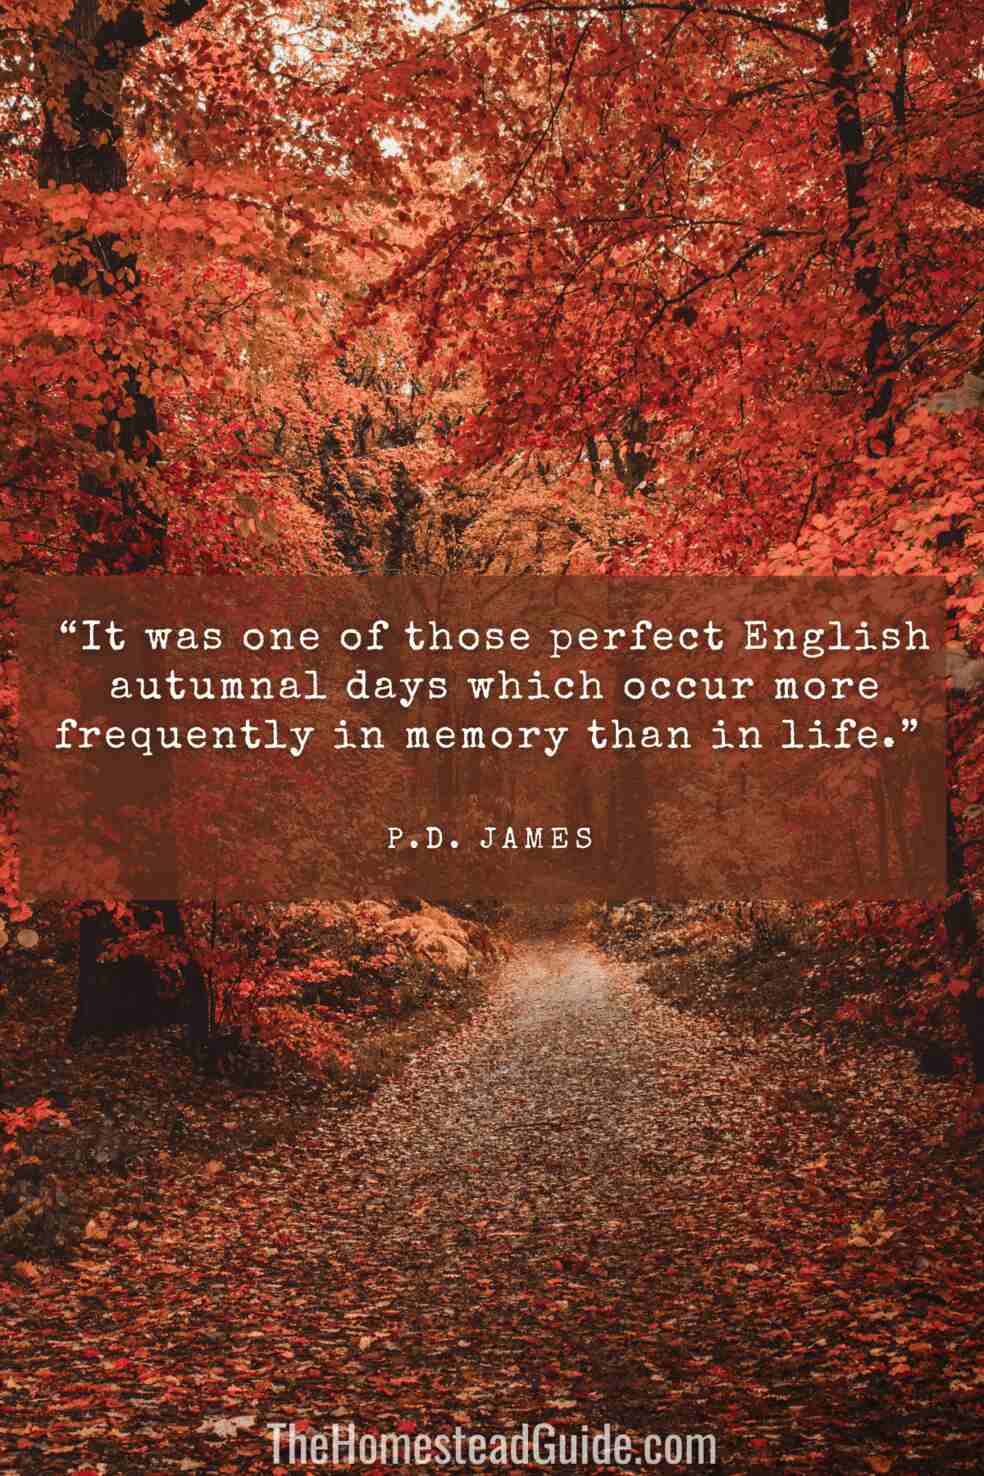 It was one of those perfect English autumnal days which occur more frequently in memory than in life.